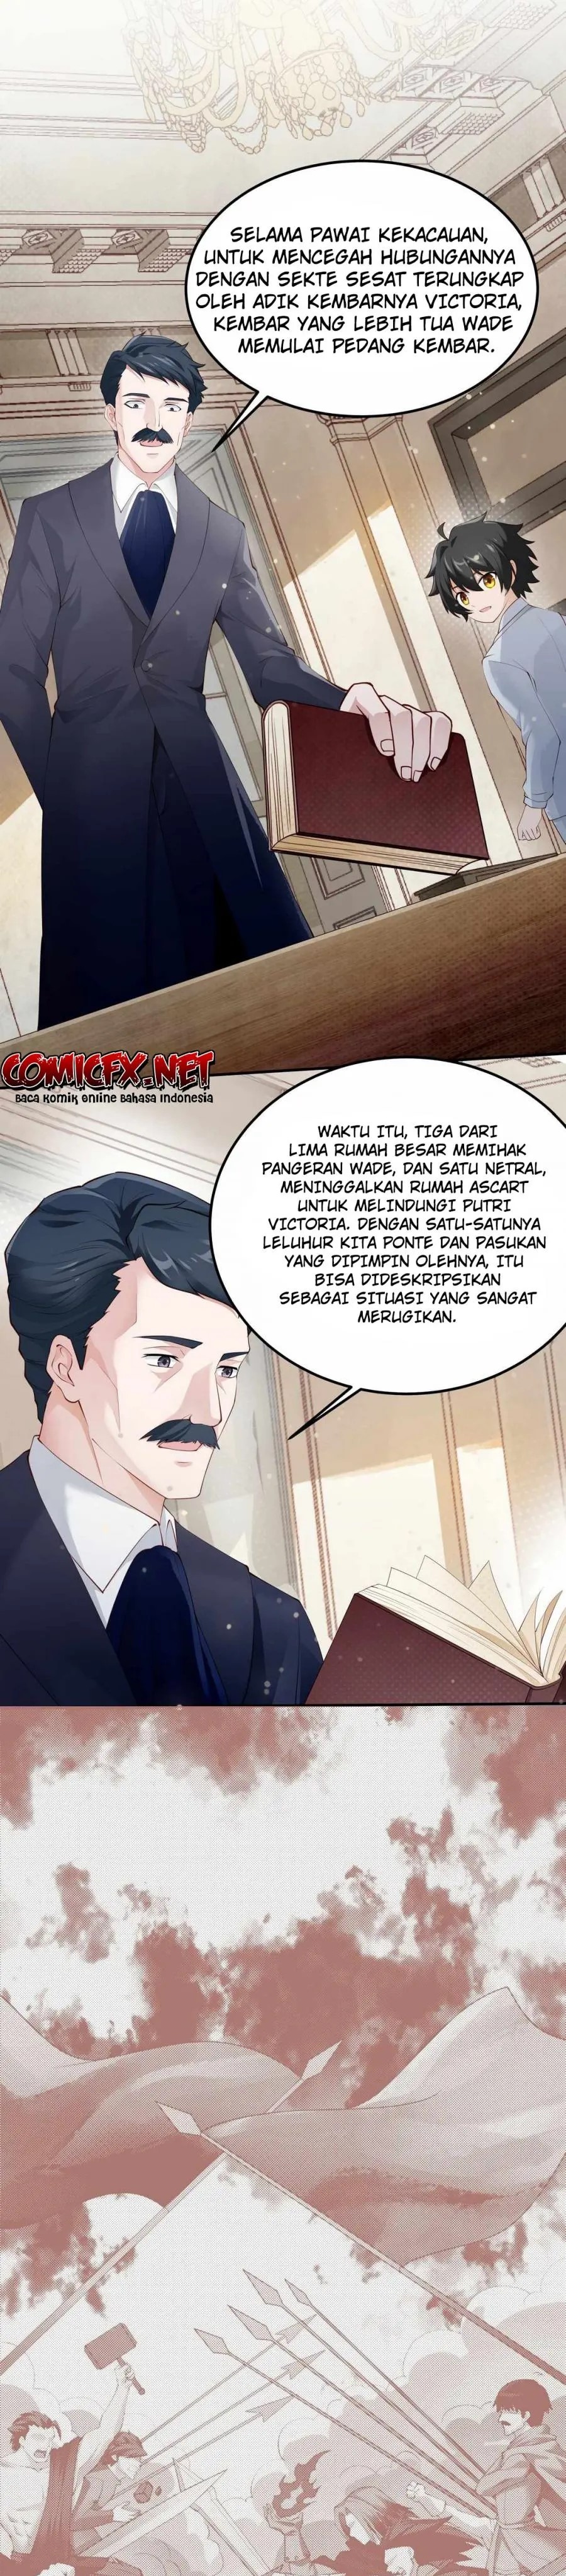 Dilarang COPAS - situs resmi www.mangacanblog.com - Komik little tyrant doesnt want to meet with a bad end 010 - chapter 10 11 Indonesia little tyrant doesnt want to meet with a bad end 010 - chapter 10 Terbaru 21|Baca Manga Komik Indonesia|Mangacan